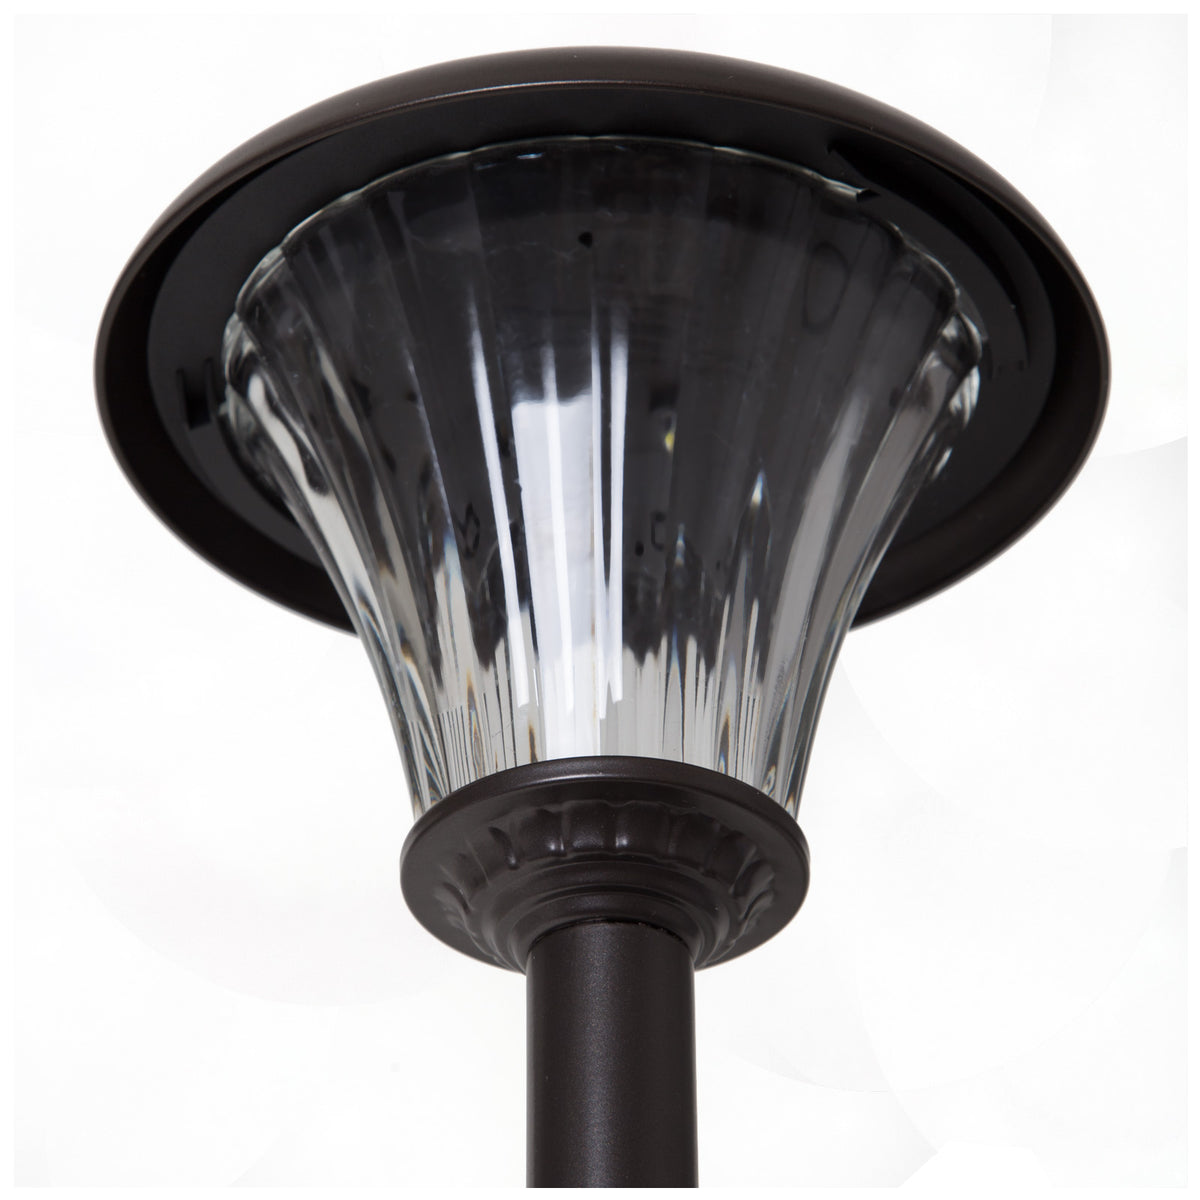 buy outdoor solar lights at cheap rate in bulk. wholesale & retail lighting goods & supplies store. home décor ideas, maintenance, repair replacement parts